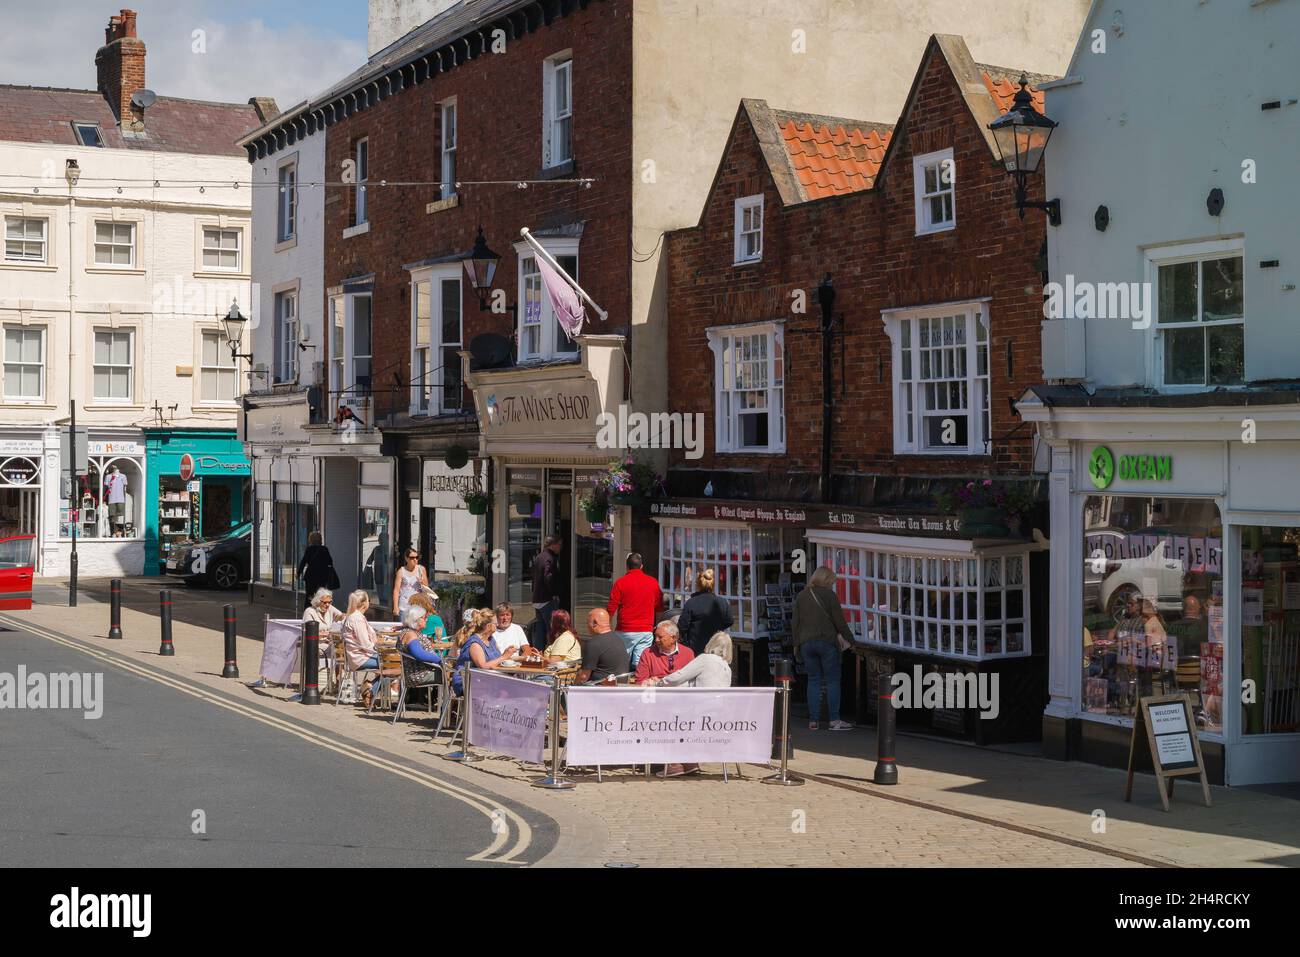 Knaresborough, view in summer of people sitting at cafe tables in Market Place in the scenic North Yorkshire town of Knaresborough, England, UK Stock Photo